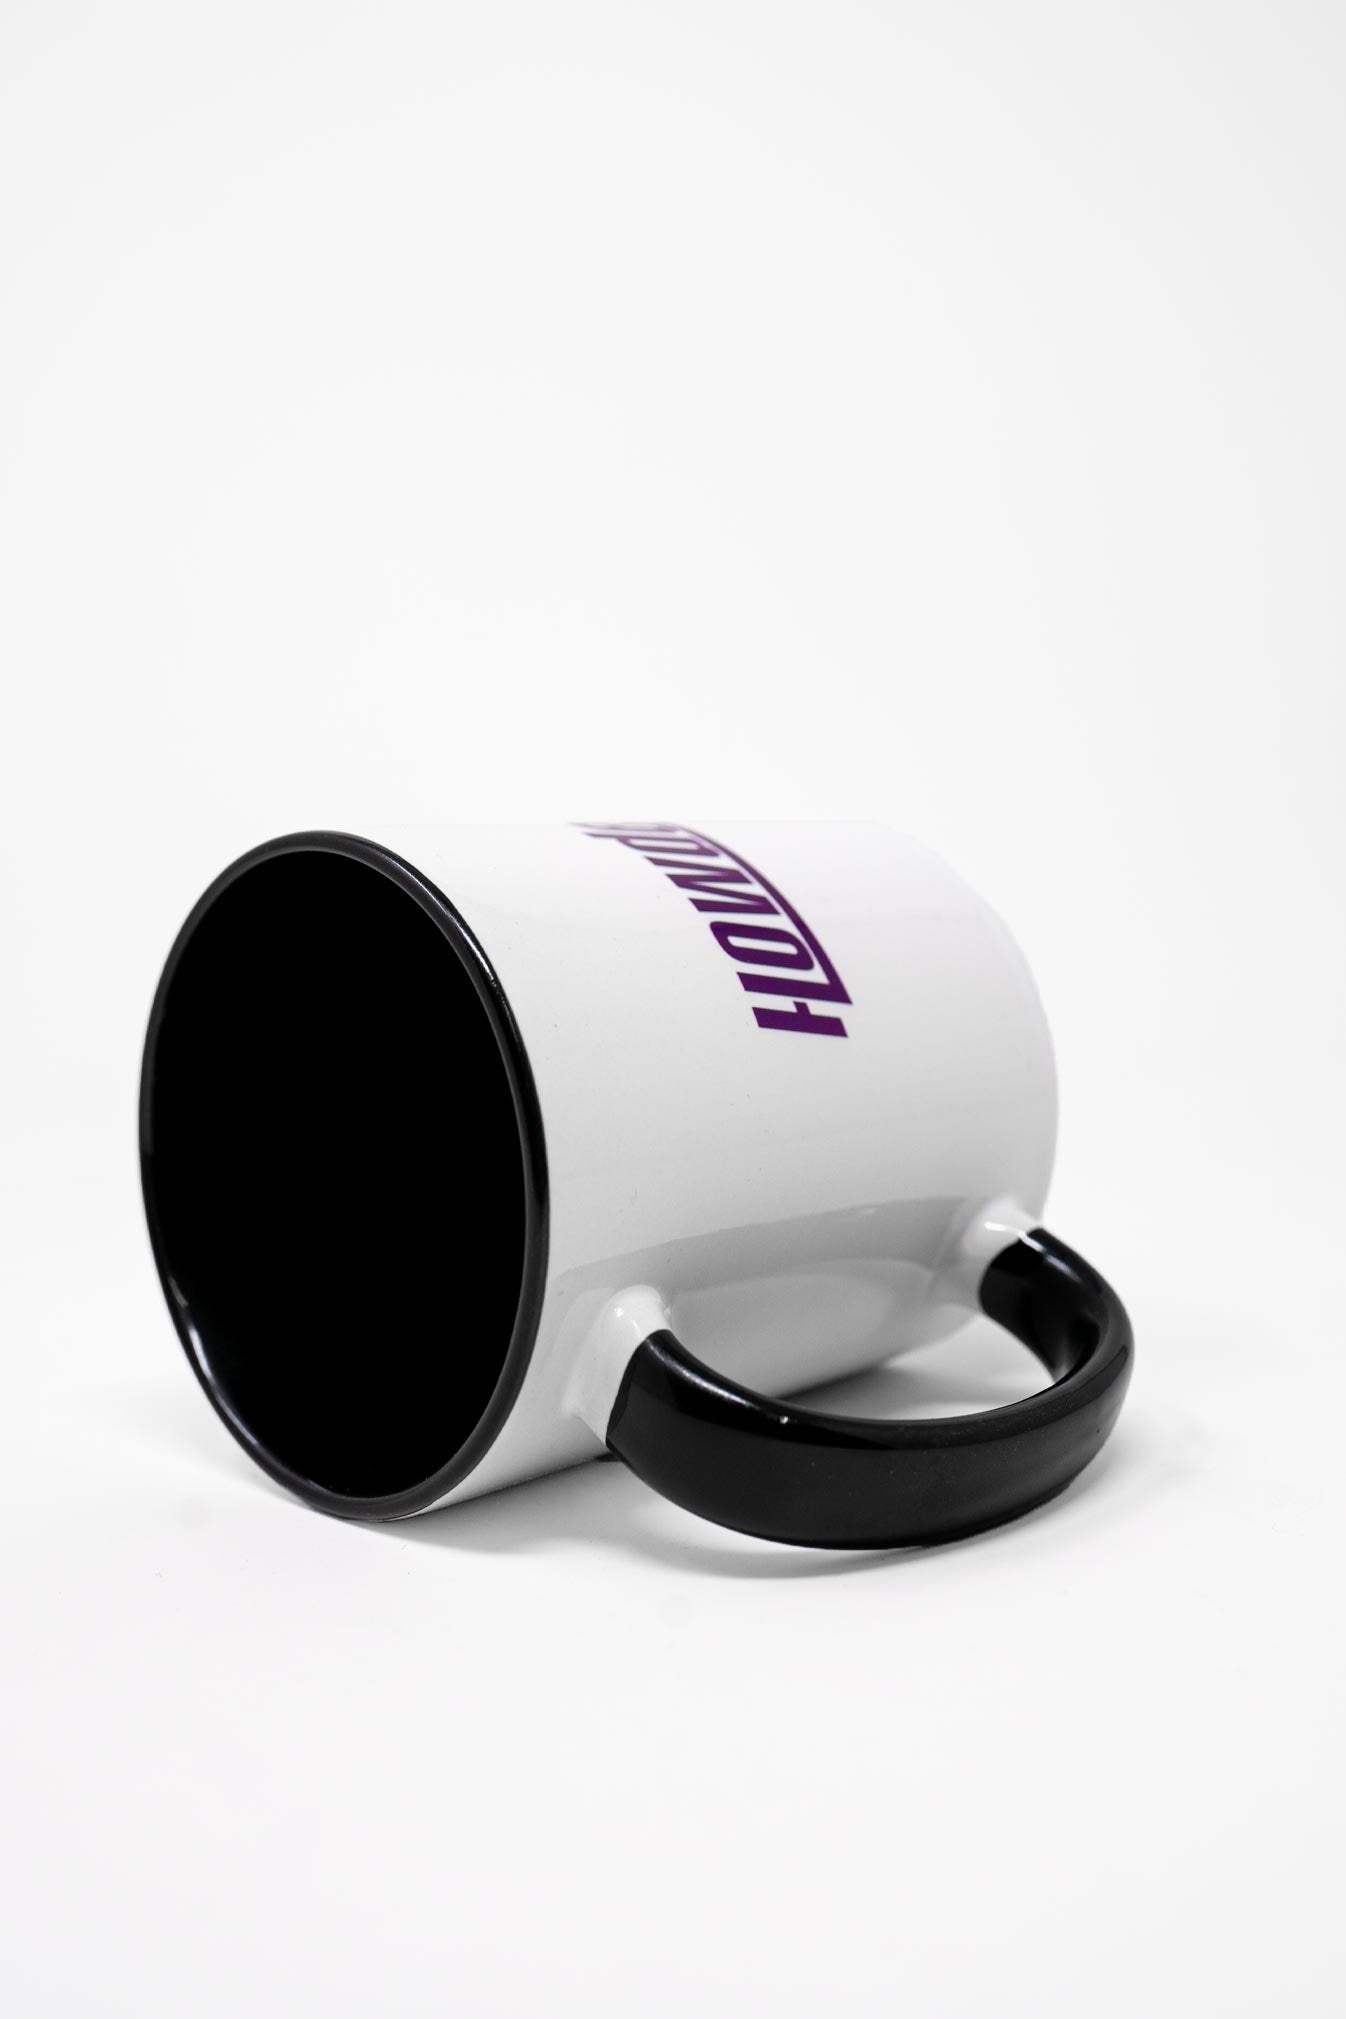 Limited Coffee Cup